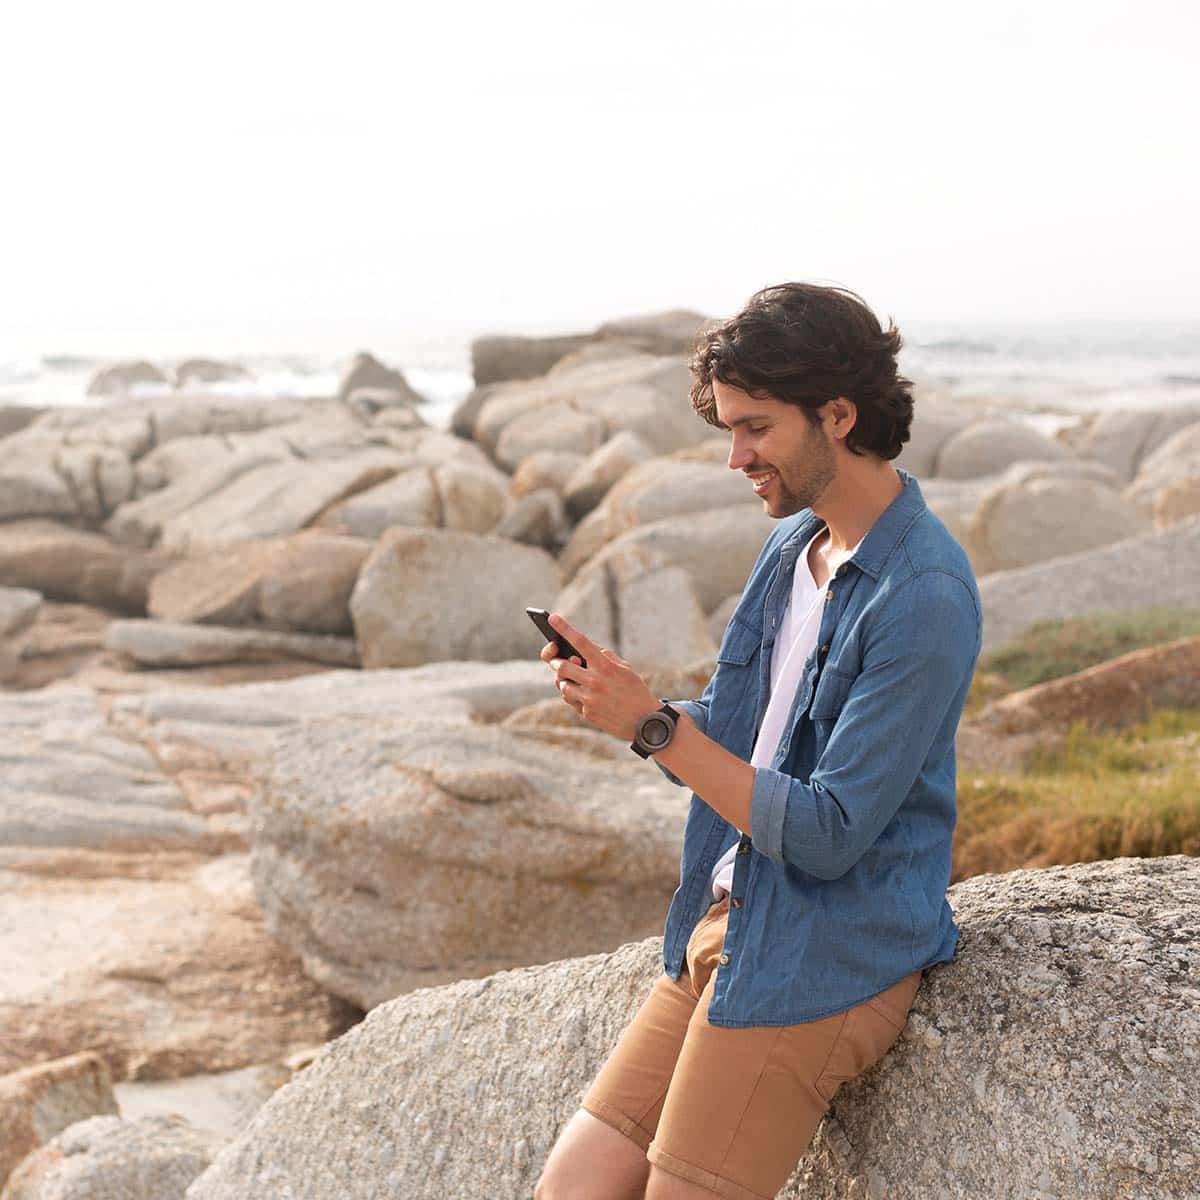 Student with smartphone on beach